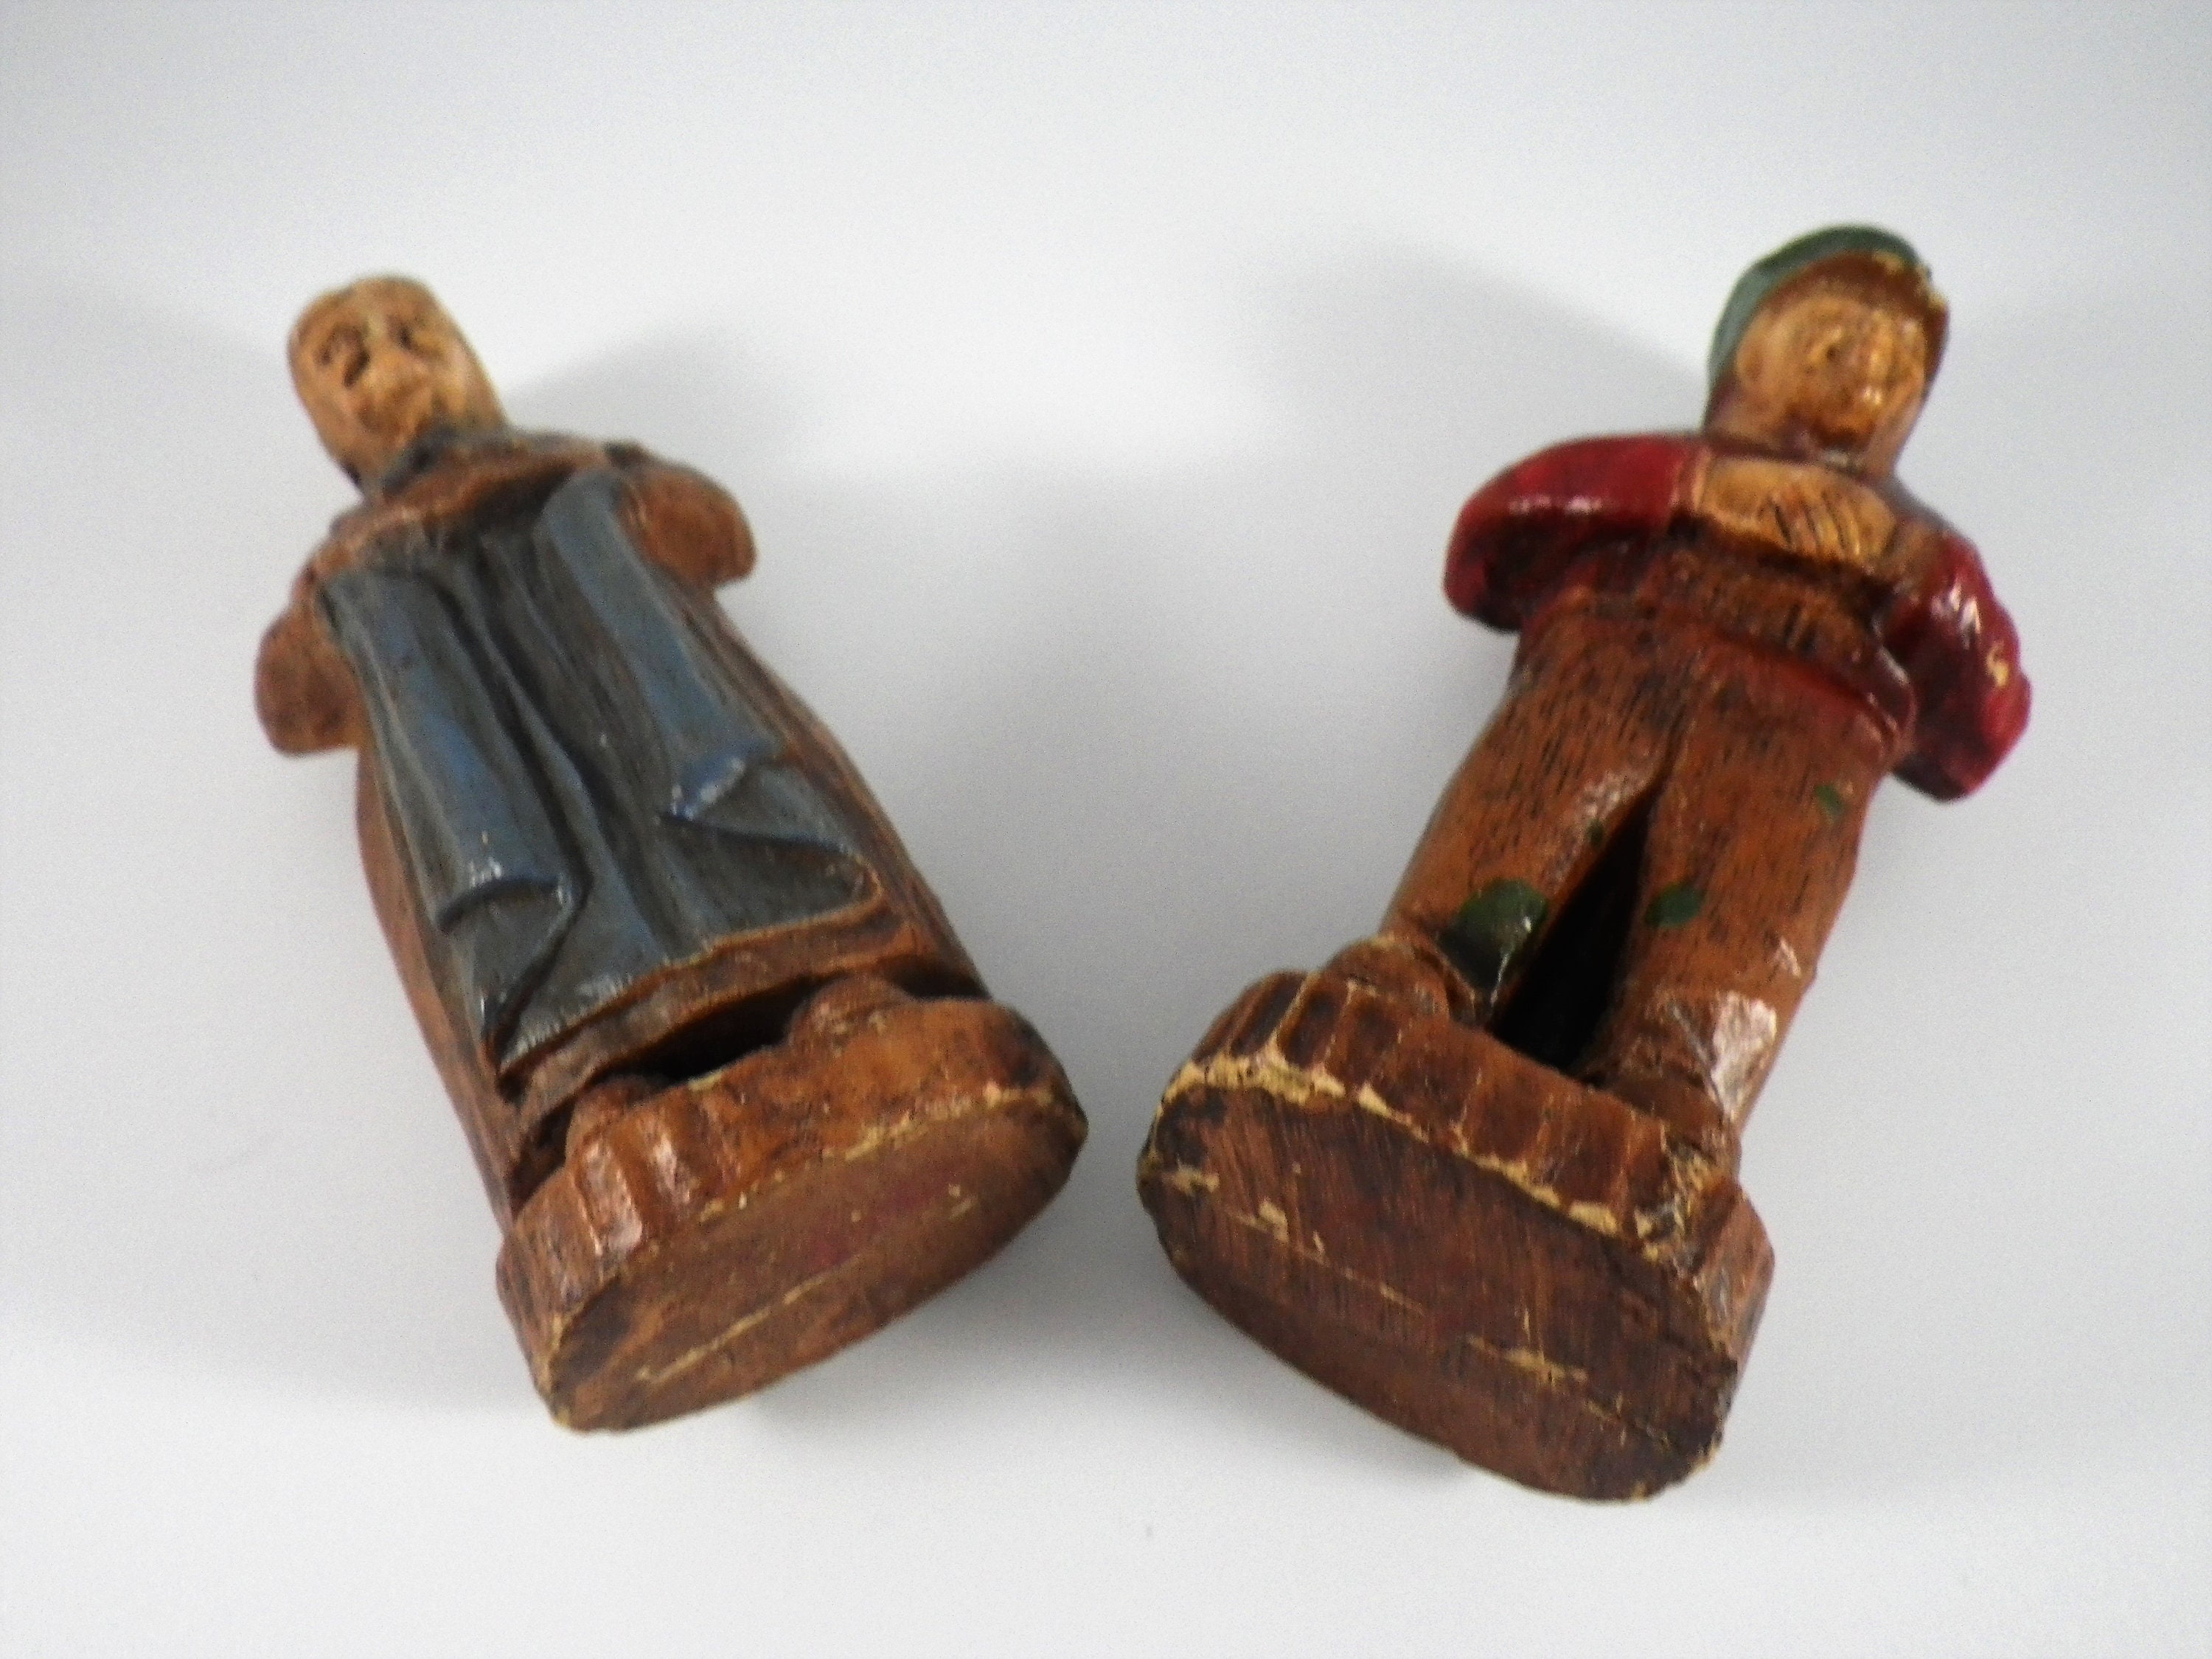 Pair of Wooden Figurines Man & Woman by Syroco 4-1/4 H Grandma and Grandpa Train Conducter Railroad Worker Figure Made of Heavy Wood Statue